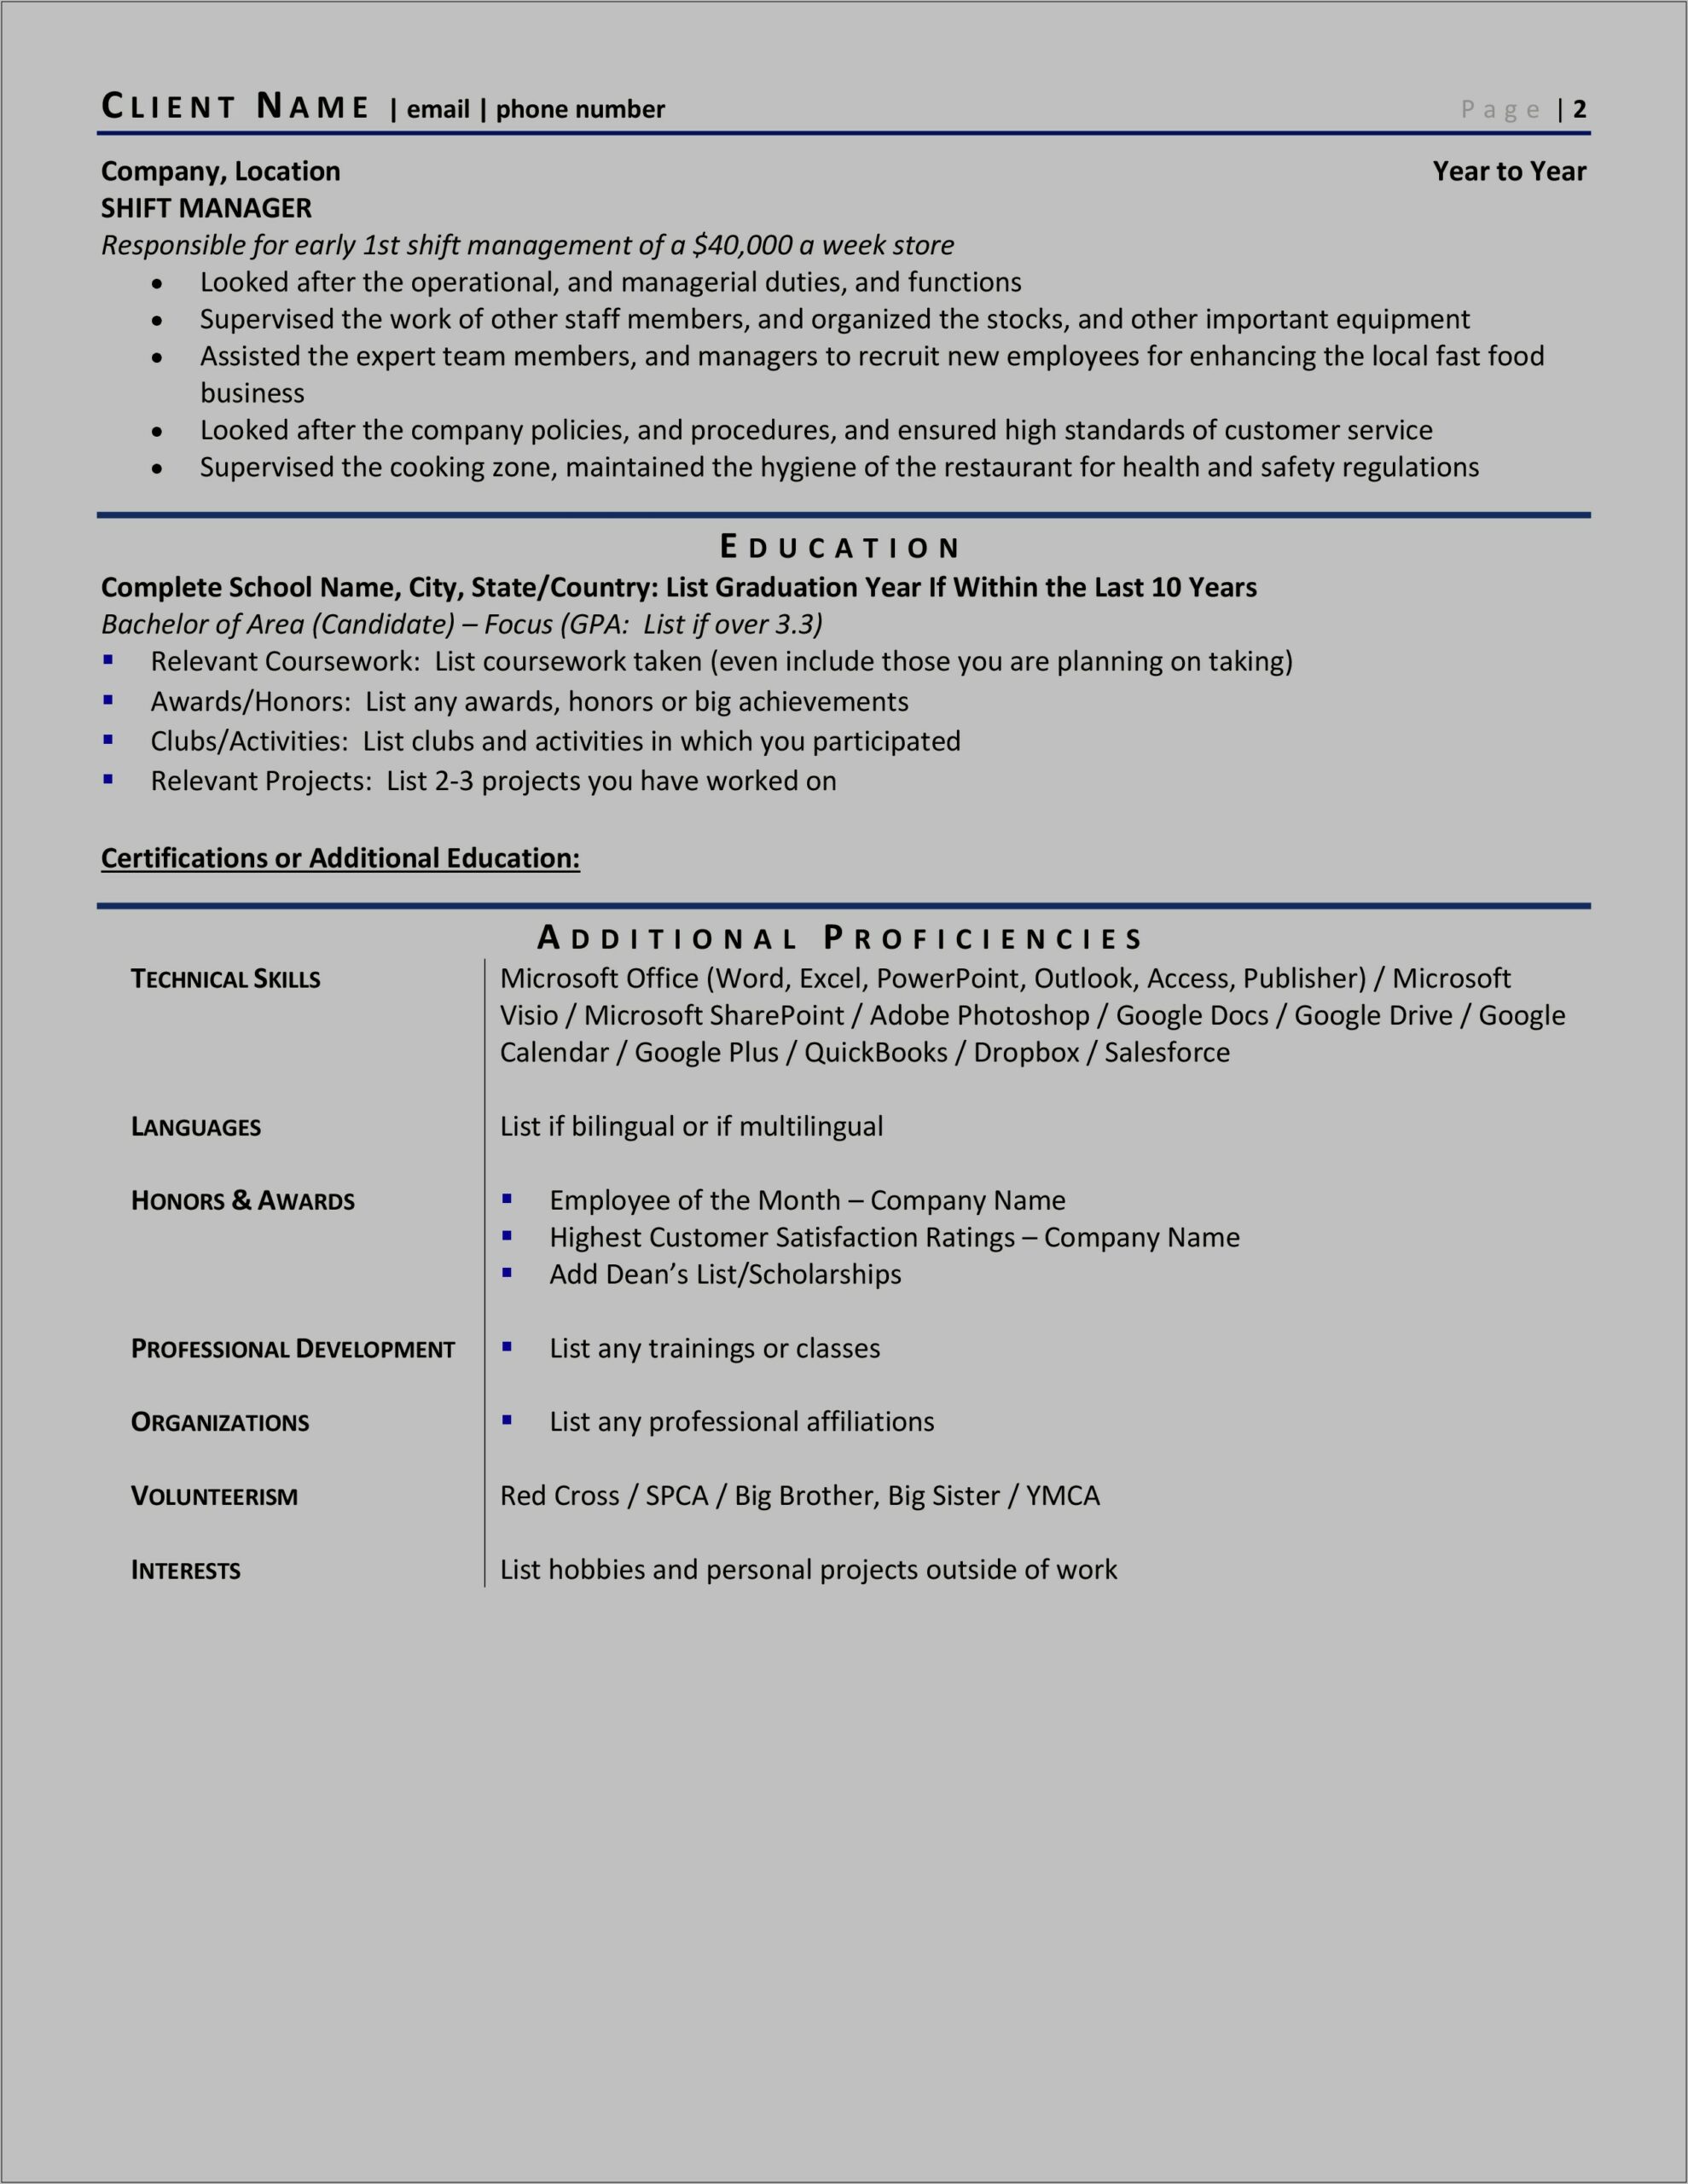 Resume Objective For Who Do Not Have Experiences